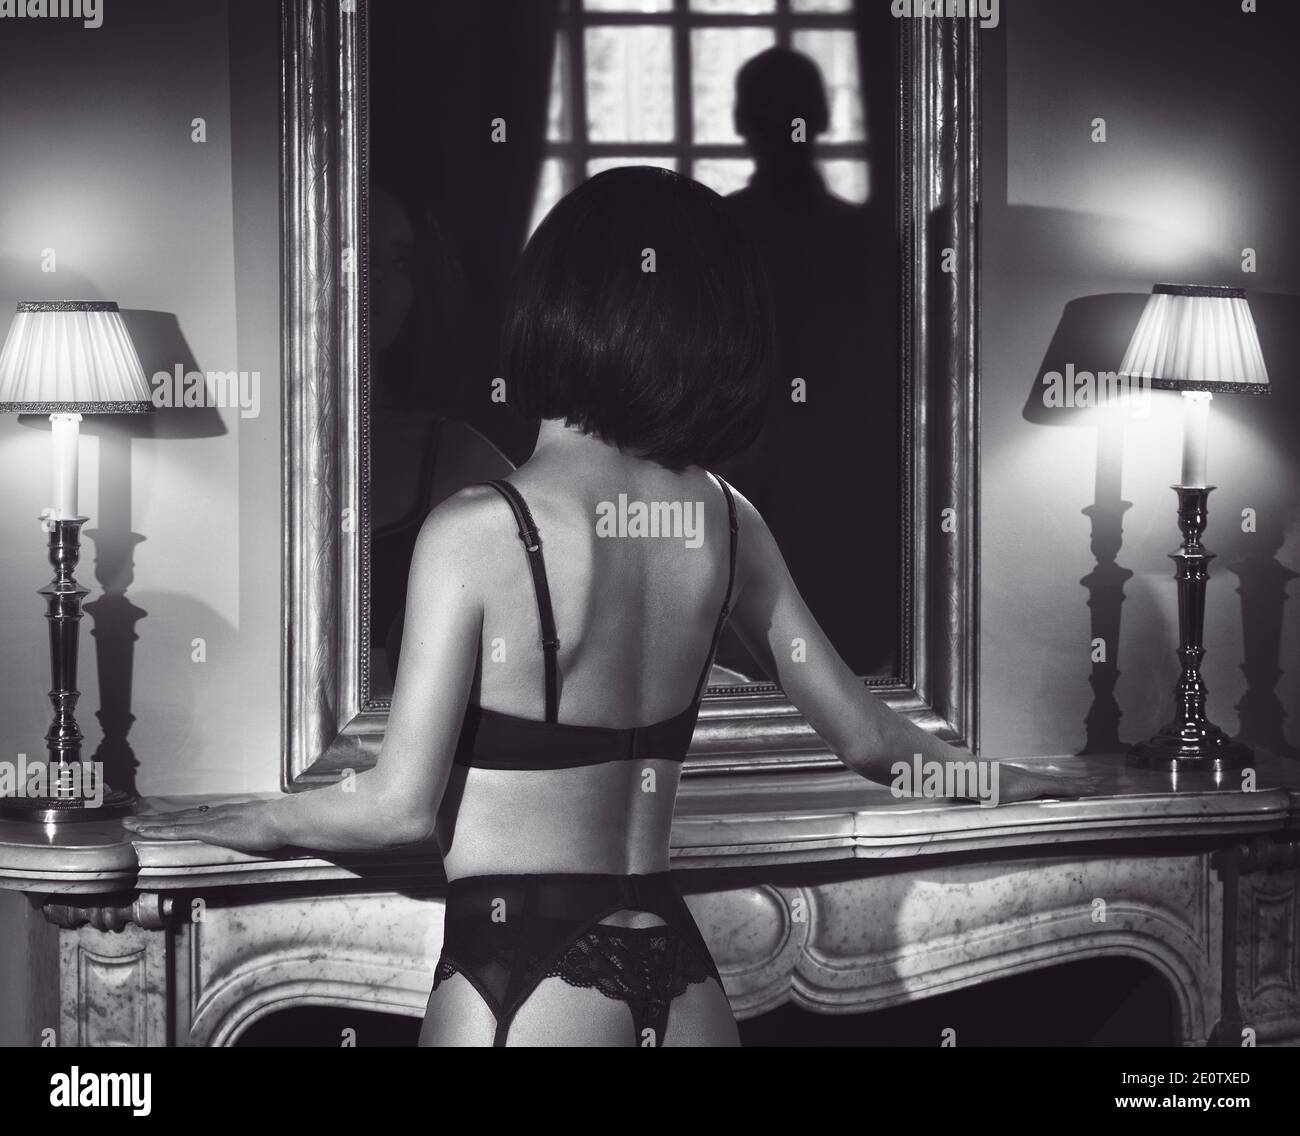 Woman with short black hair standing half naked by mantelpiece, wearing sexy lingerie, garter belt and stockings. View of her back with a shadowy dark Stock Photo